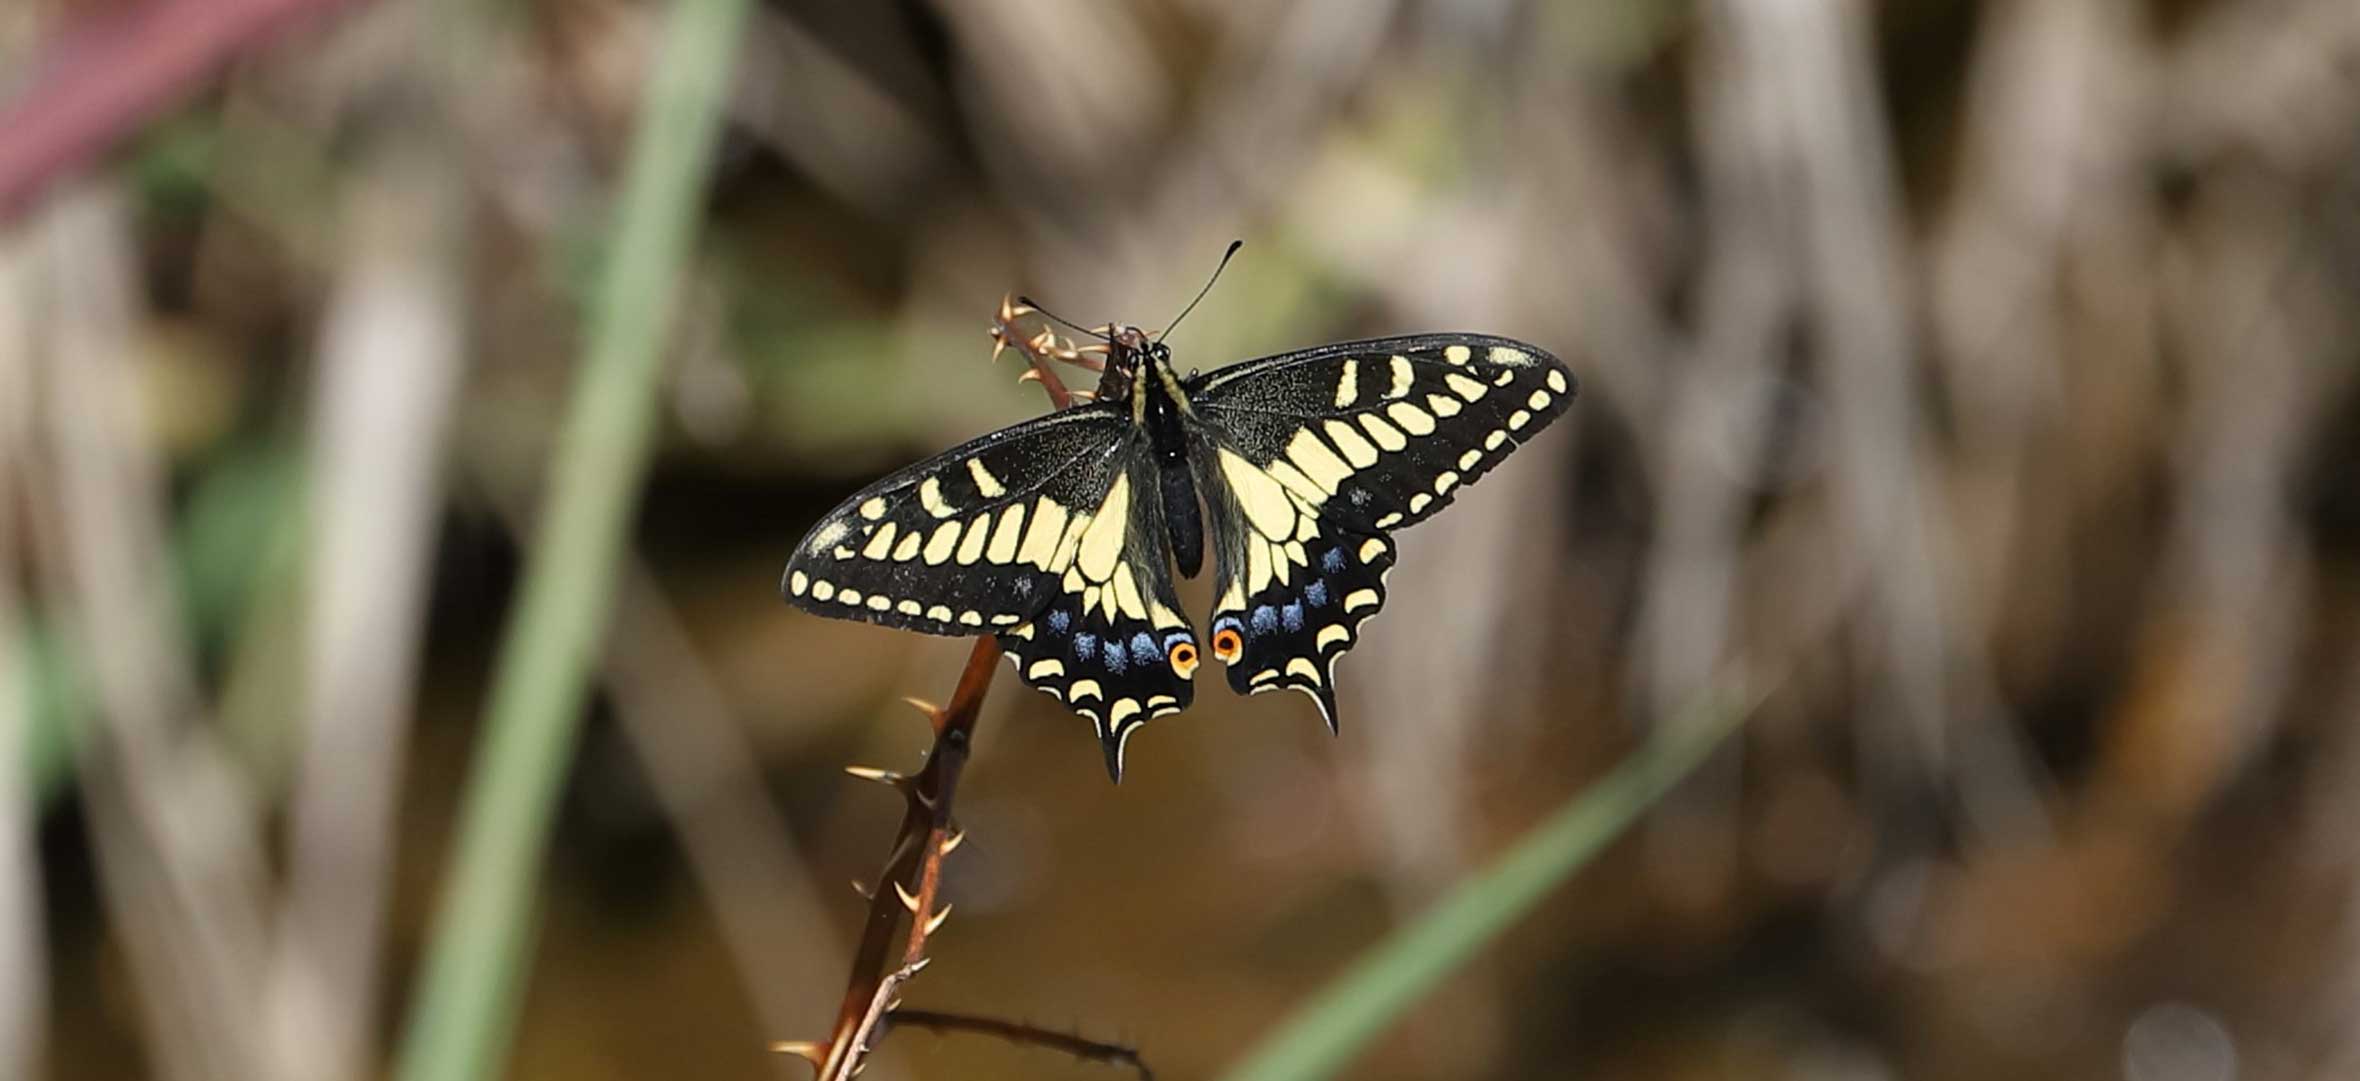 An anise swallowtail in Boundary Bay area in Metro Vancouver.